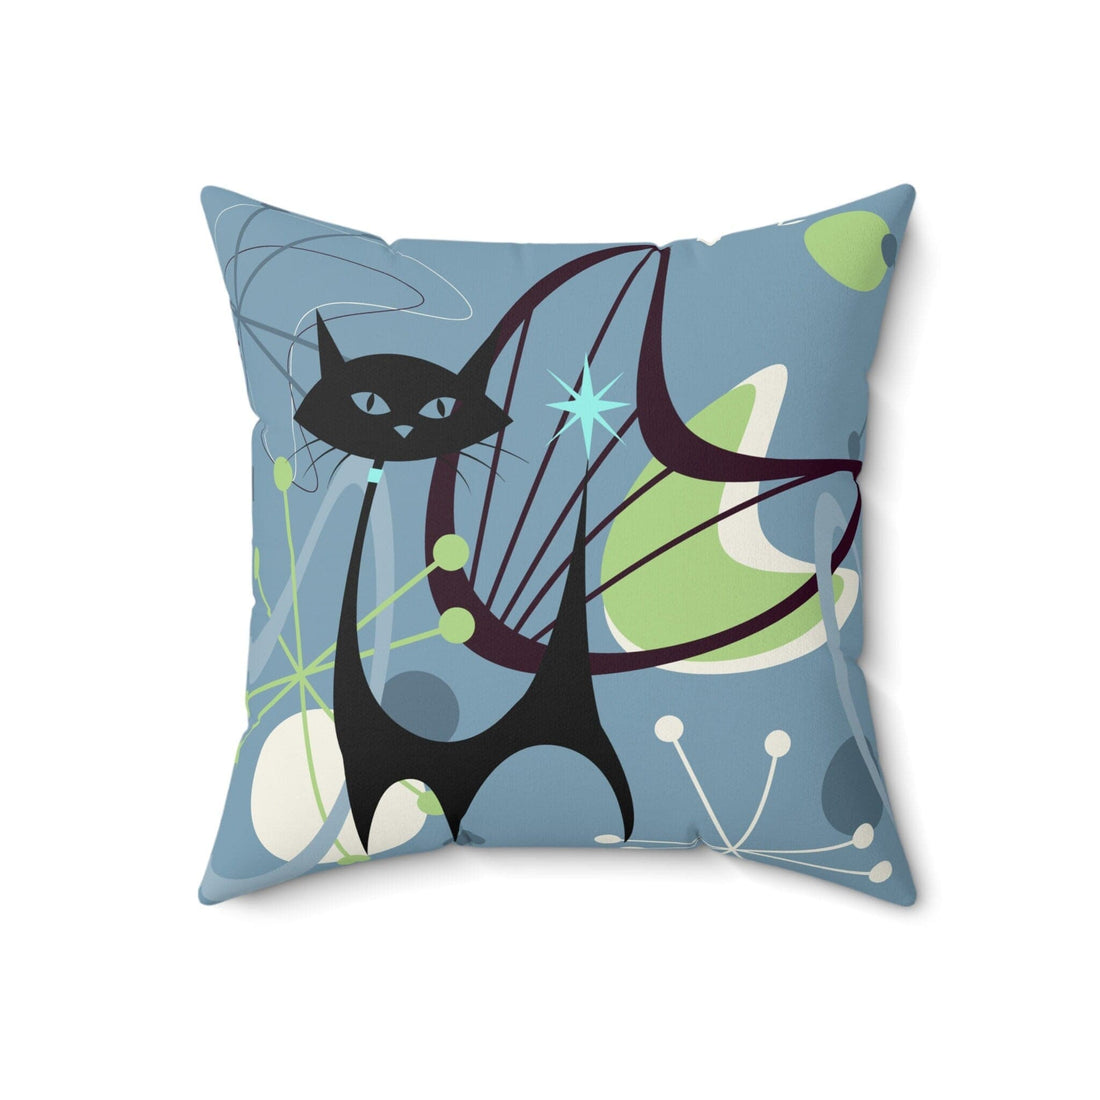 Kate McEnroe New York Groovy Atomic Cat Throw Pillow with insert, Retro Mid Century Modern Boomerang Starburst Accent Pillow, MCM Living Room, Bedroom DecorThrow Pillows19626199738761280809